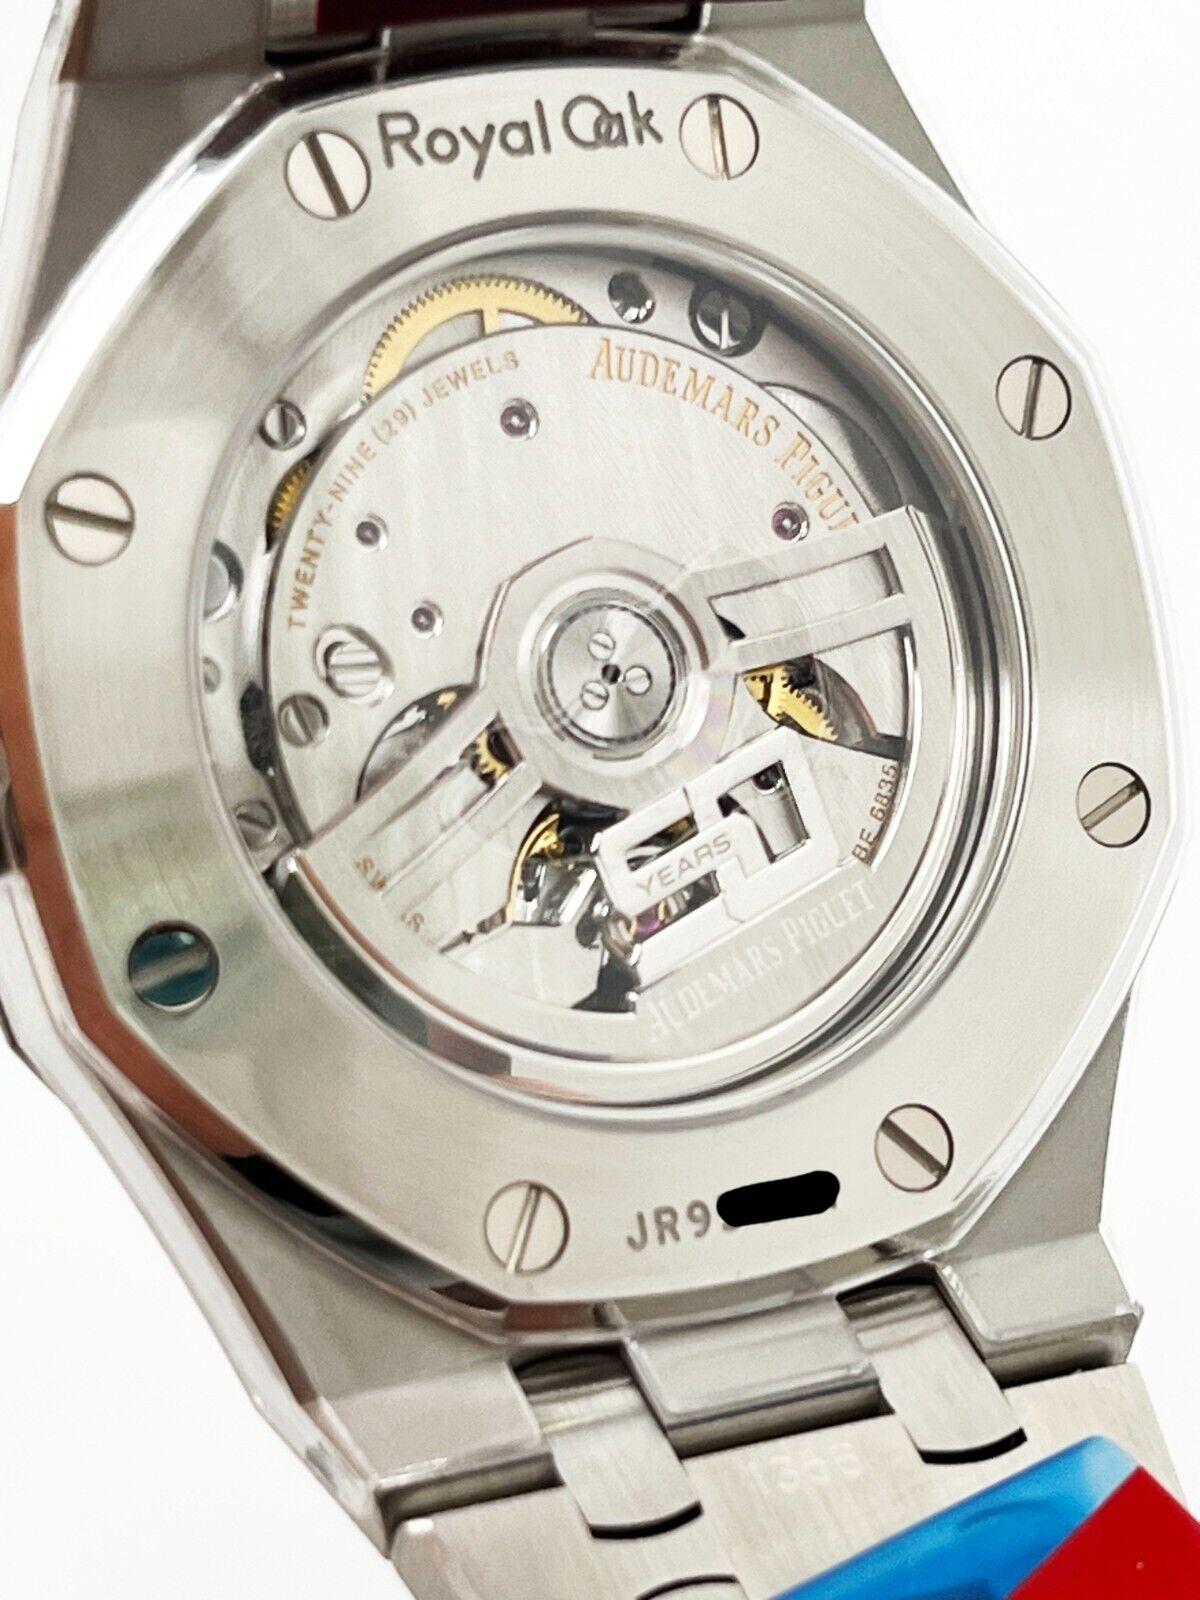 Audemars Piguet 15550ST.OO.1356ST.03 Grey Dial Stainless Steel Box Paper For Sale 4